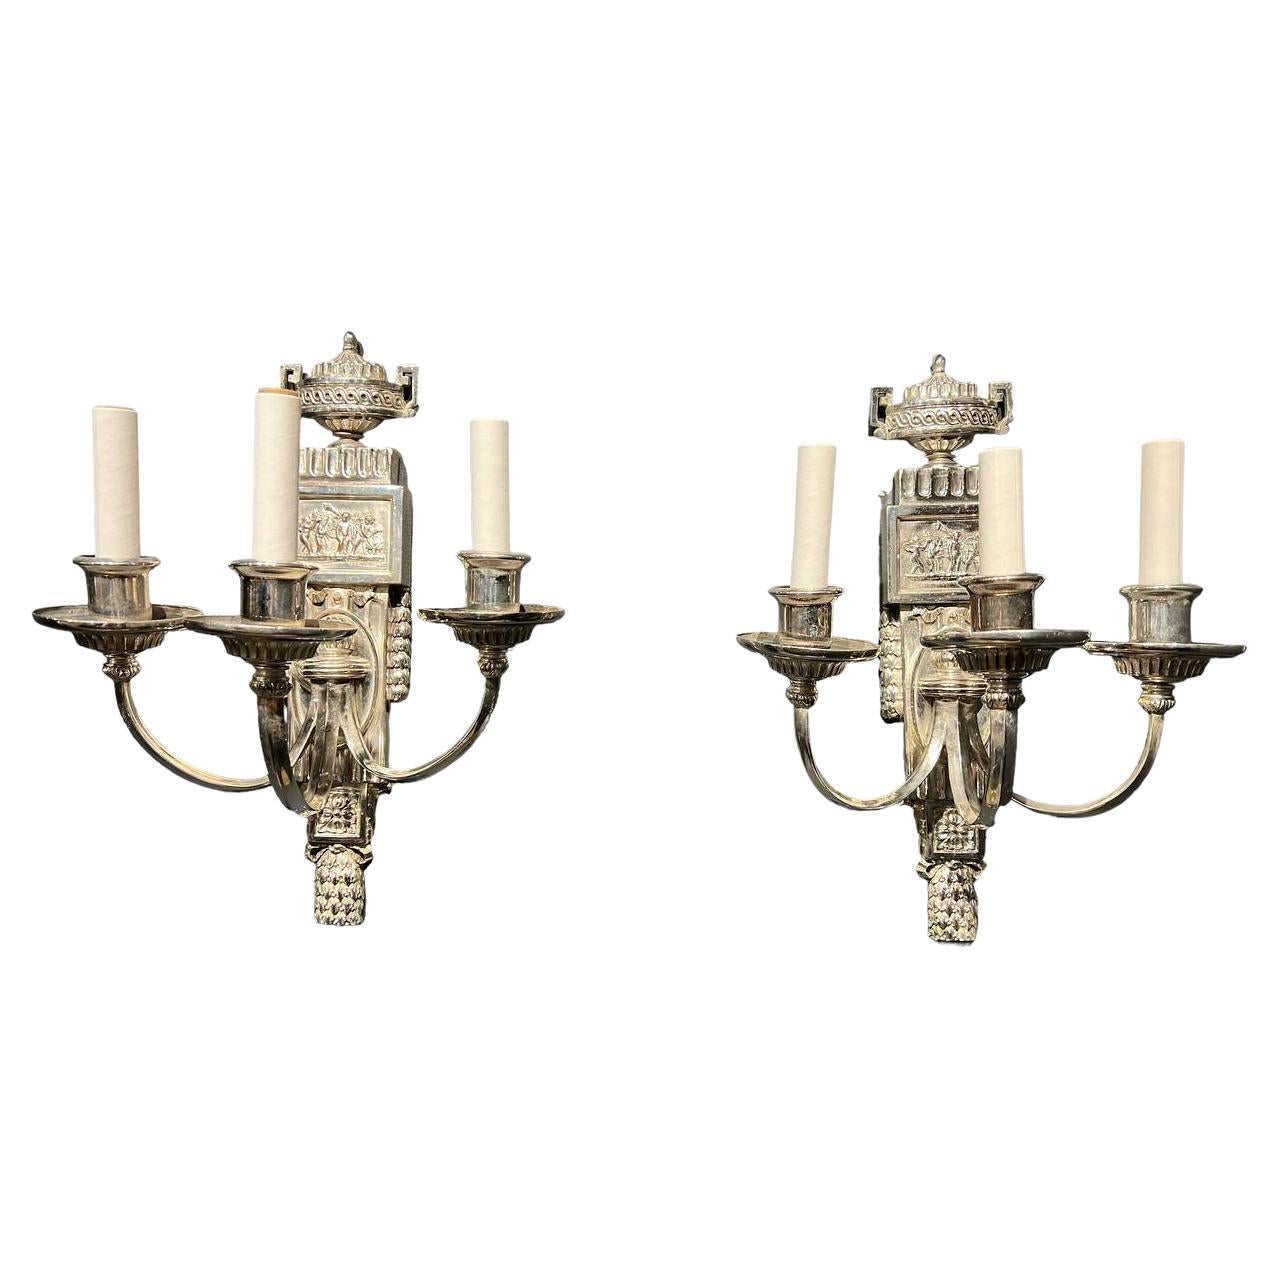 1920's Caldwell Neoclassic Silver Plated Sconces with 3 Lights